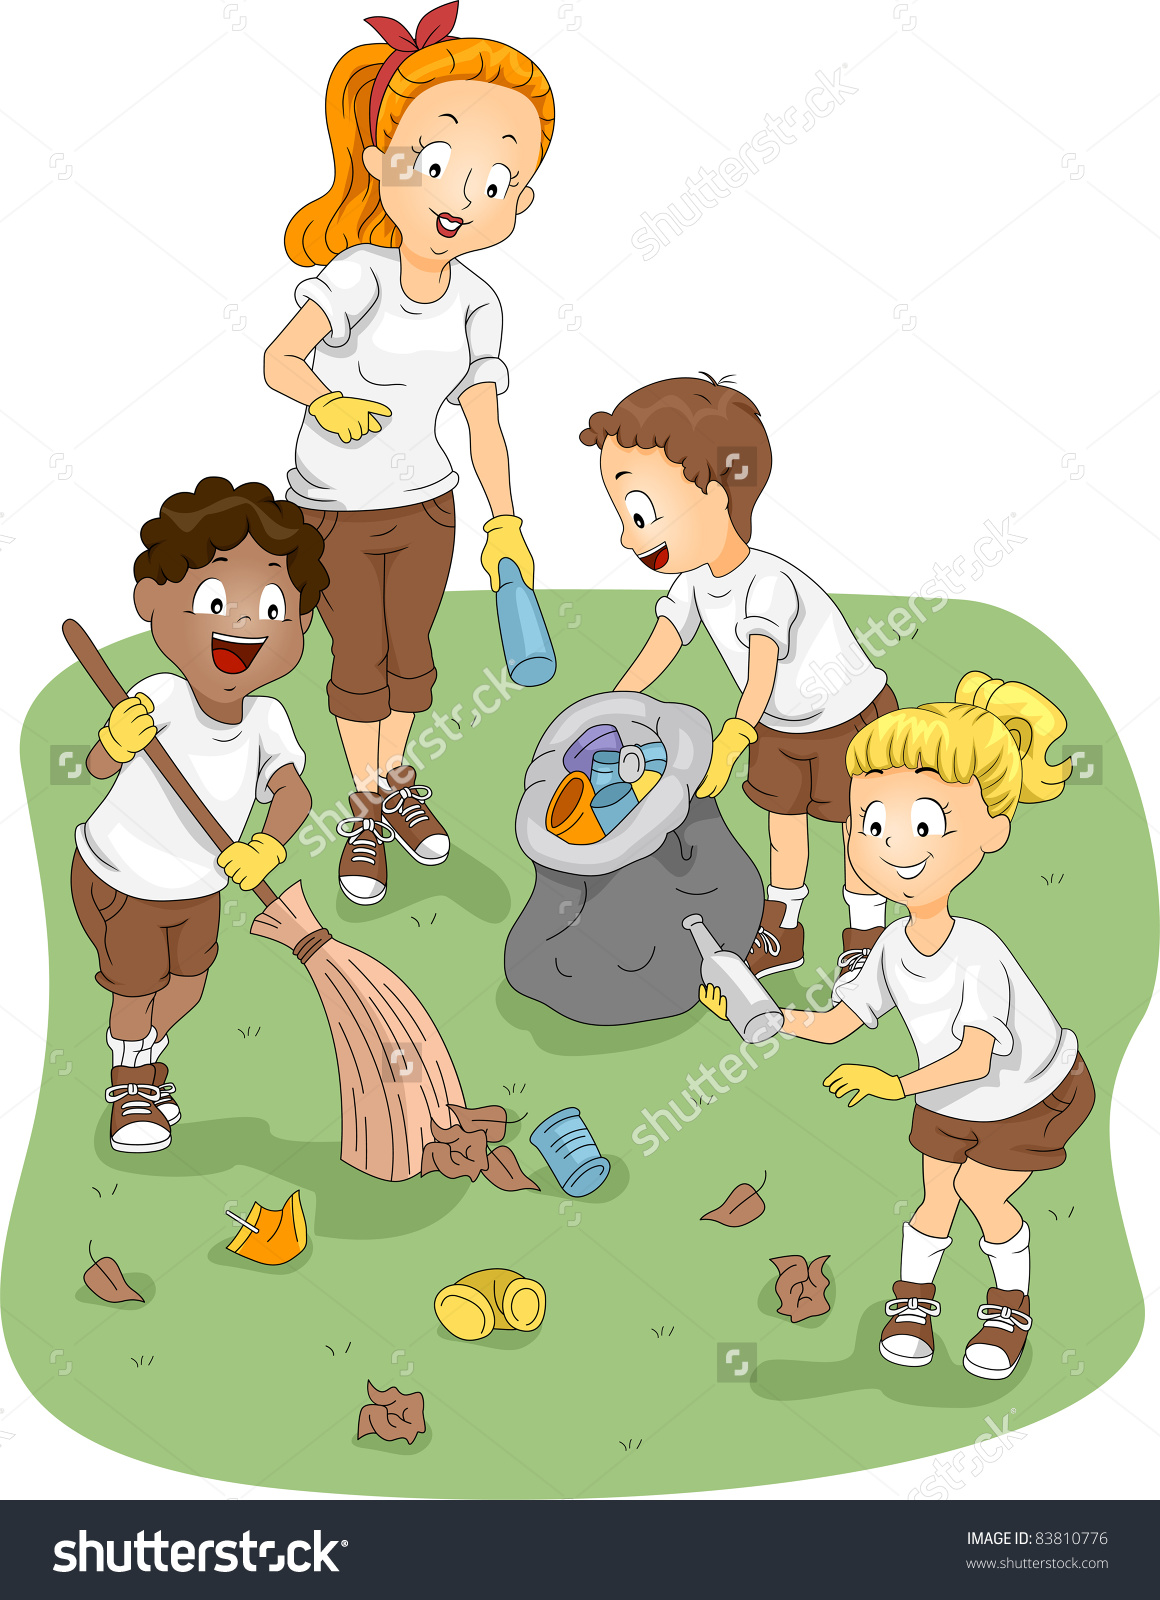 Cleaning clipart nature. 